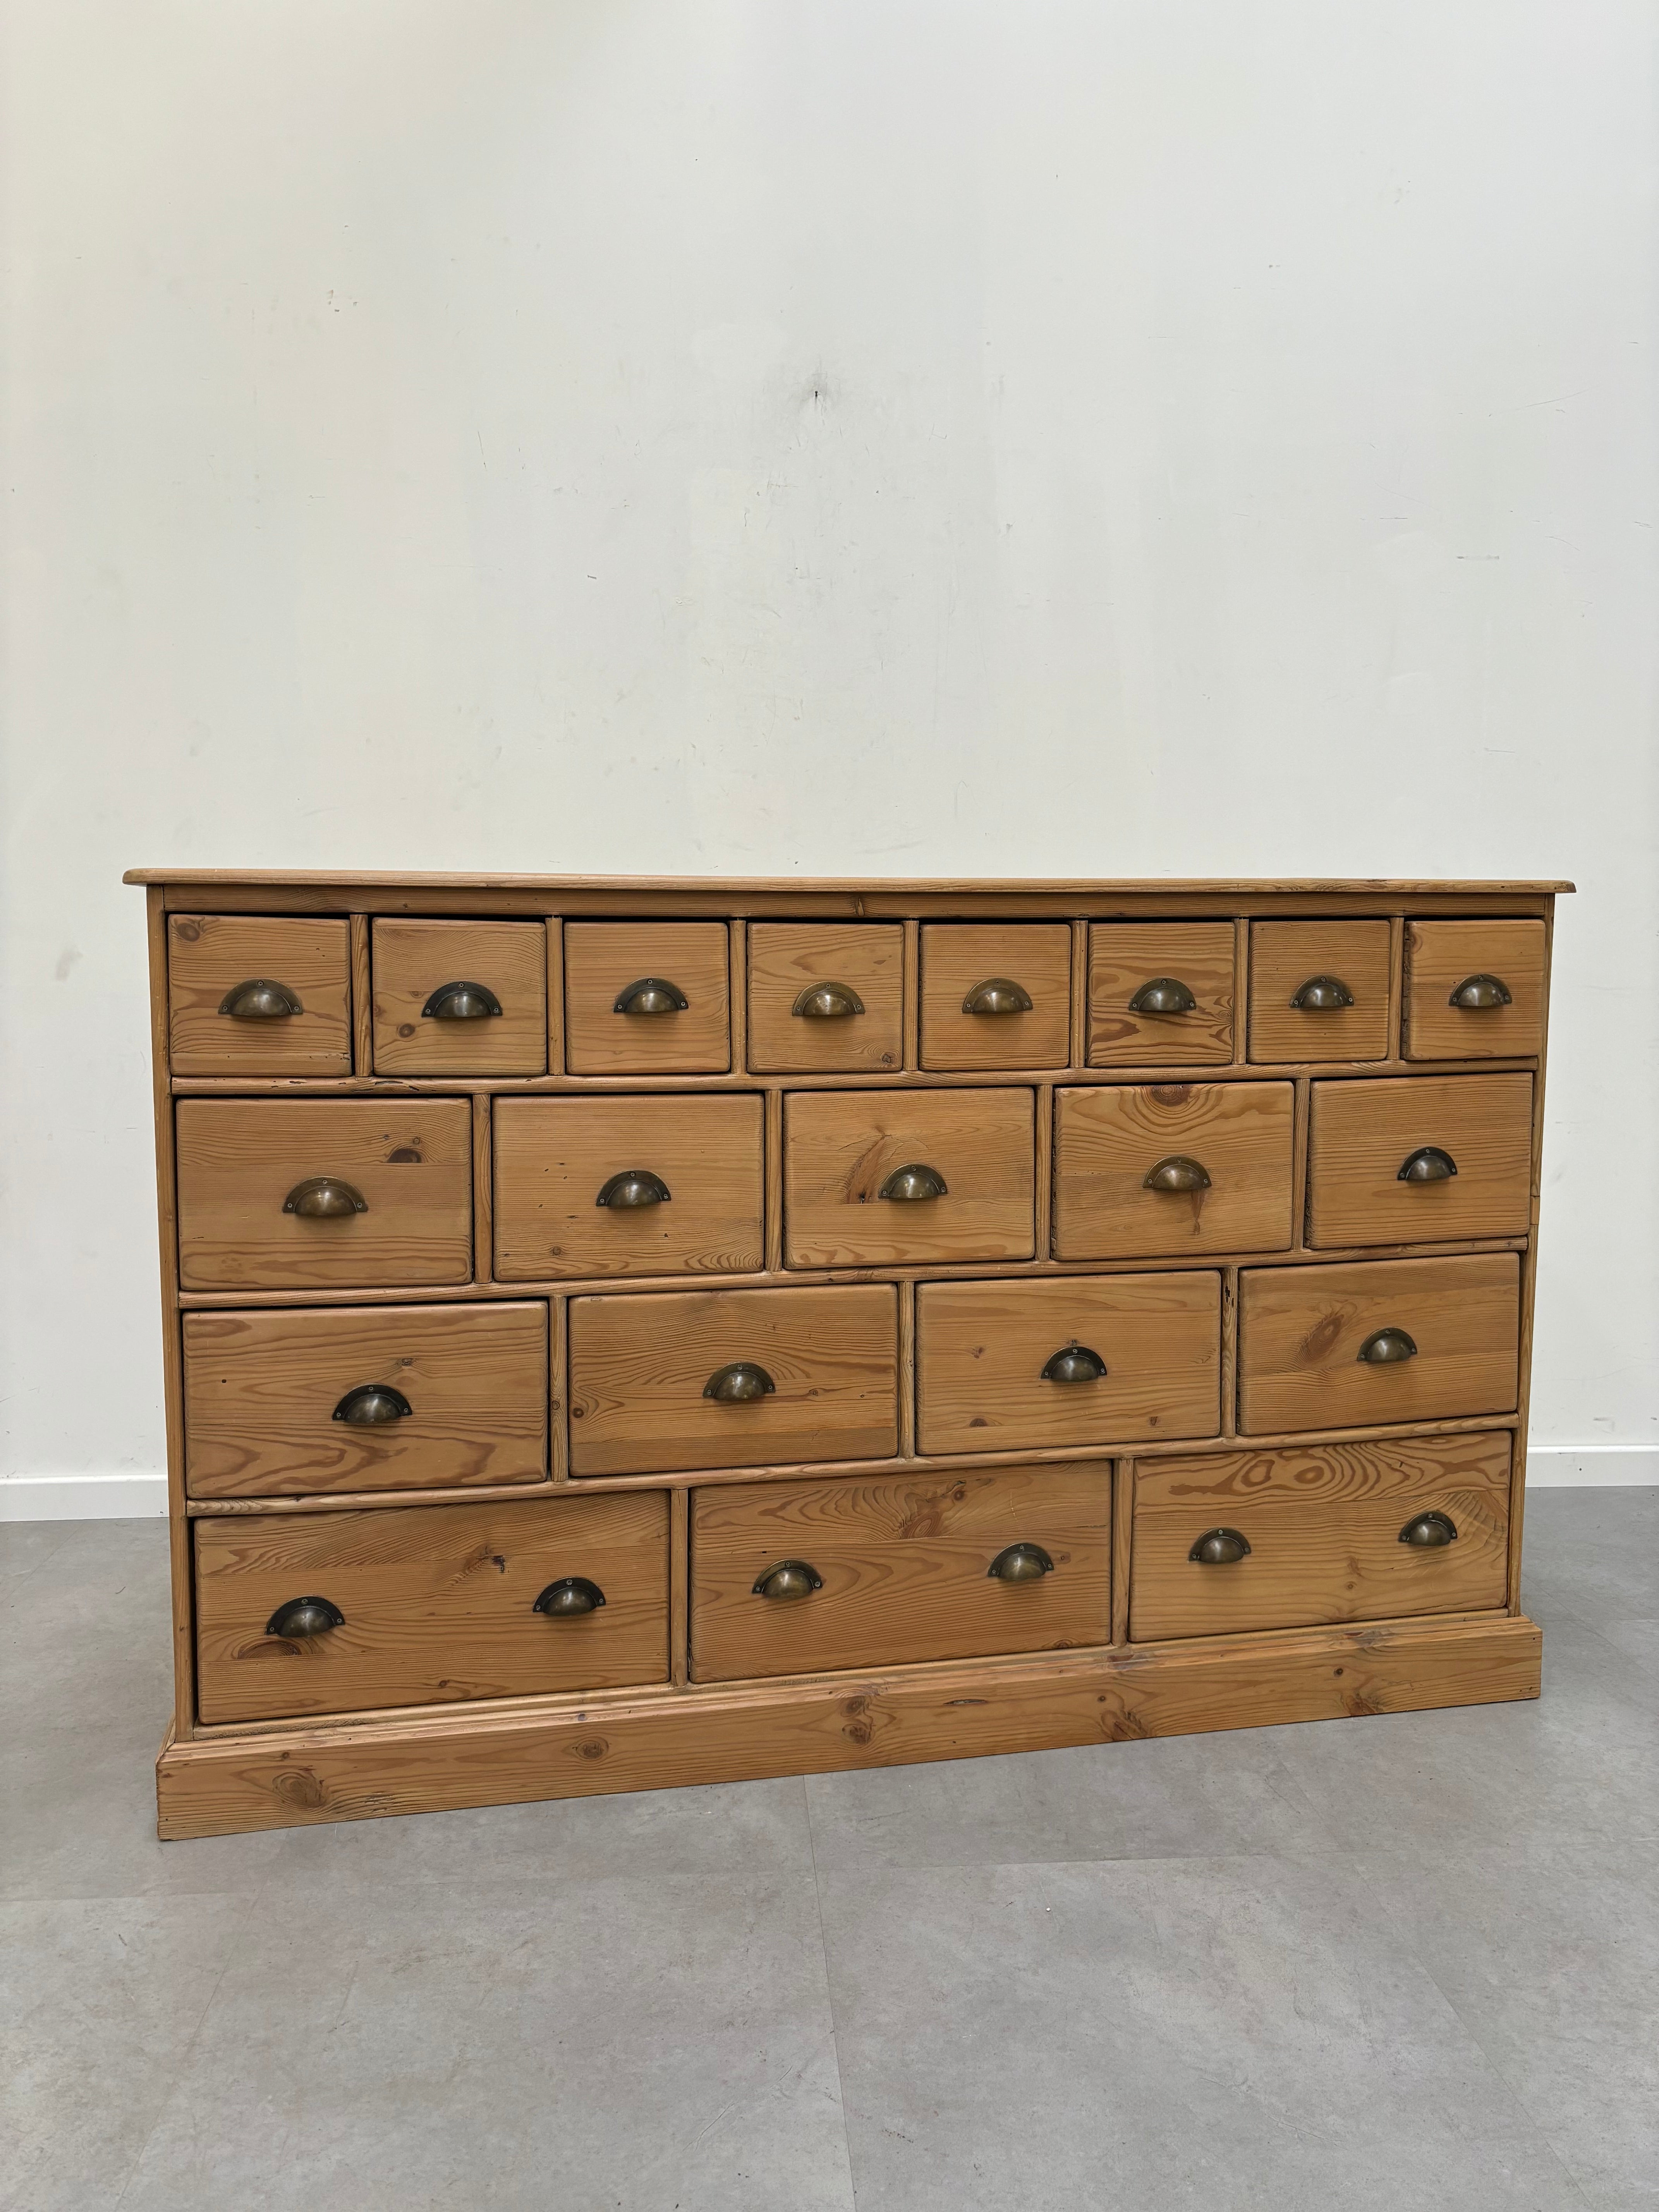 Antique pitch pine apothecary cabinet